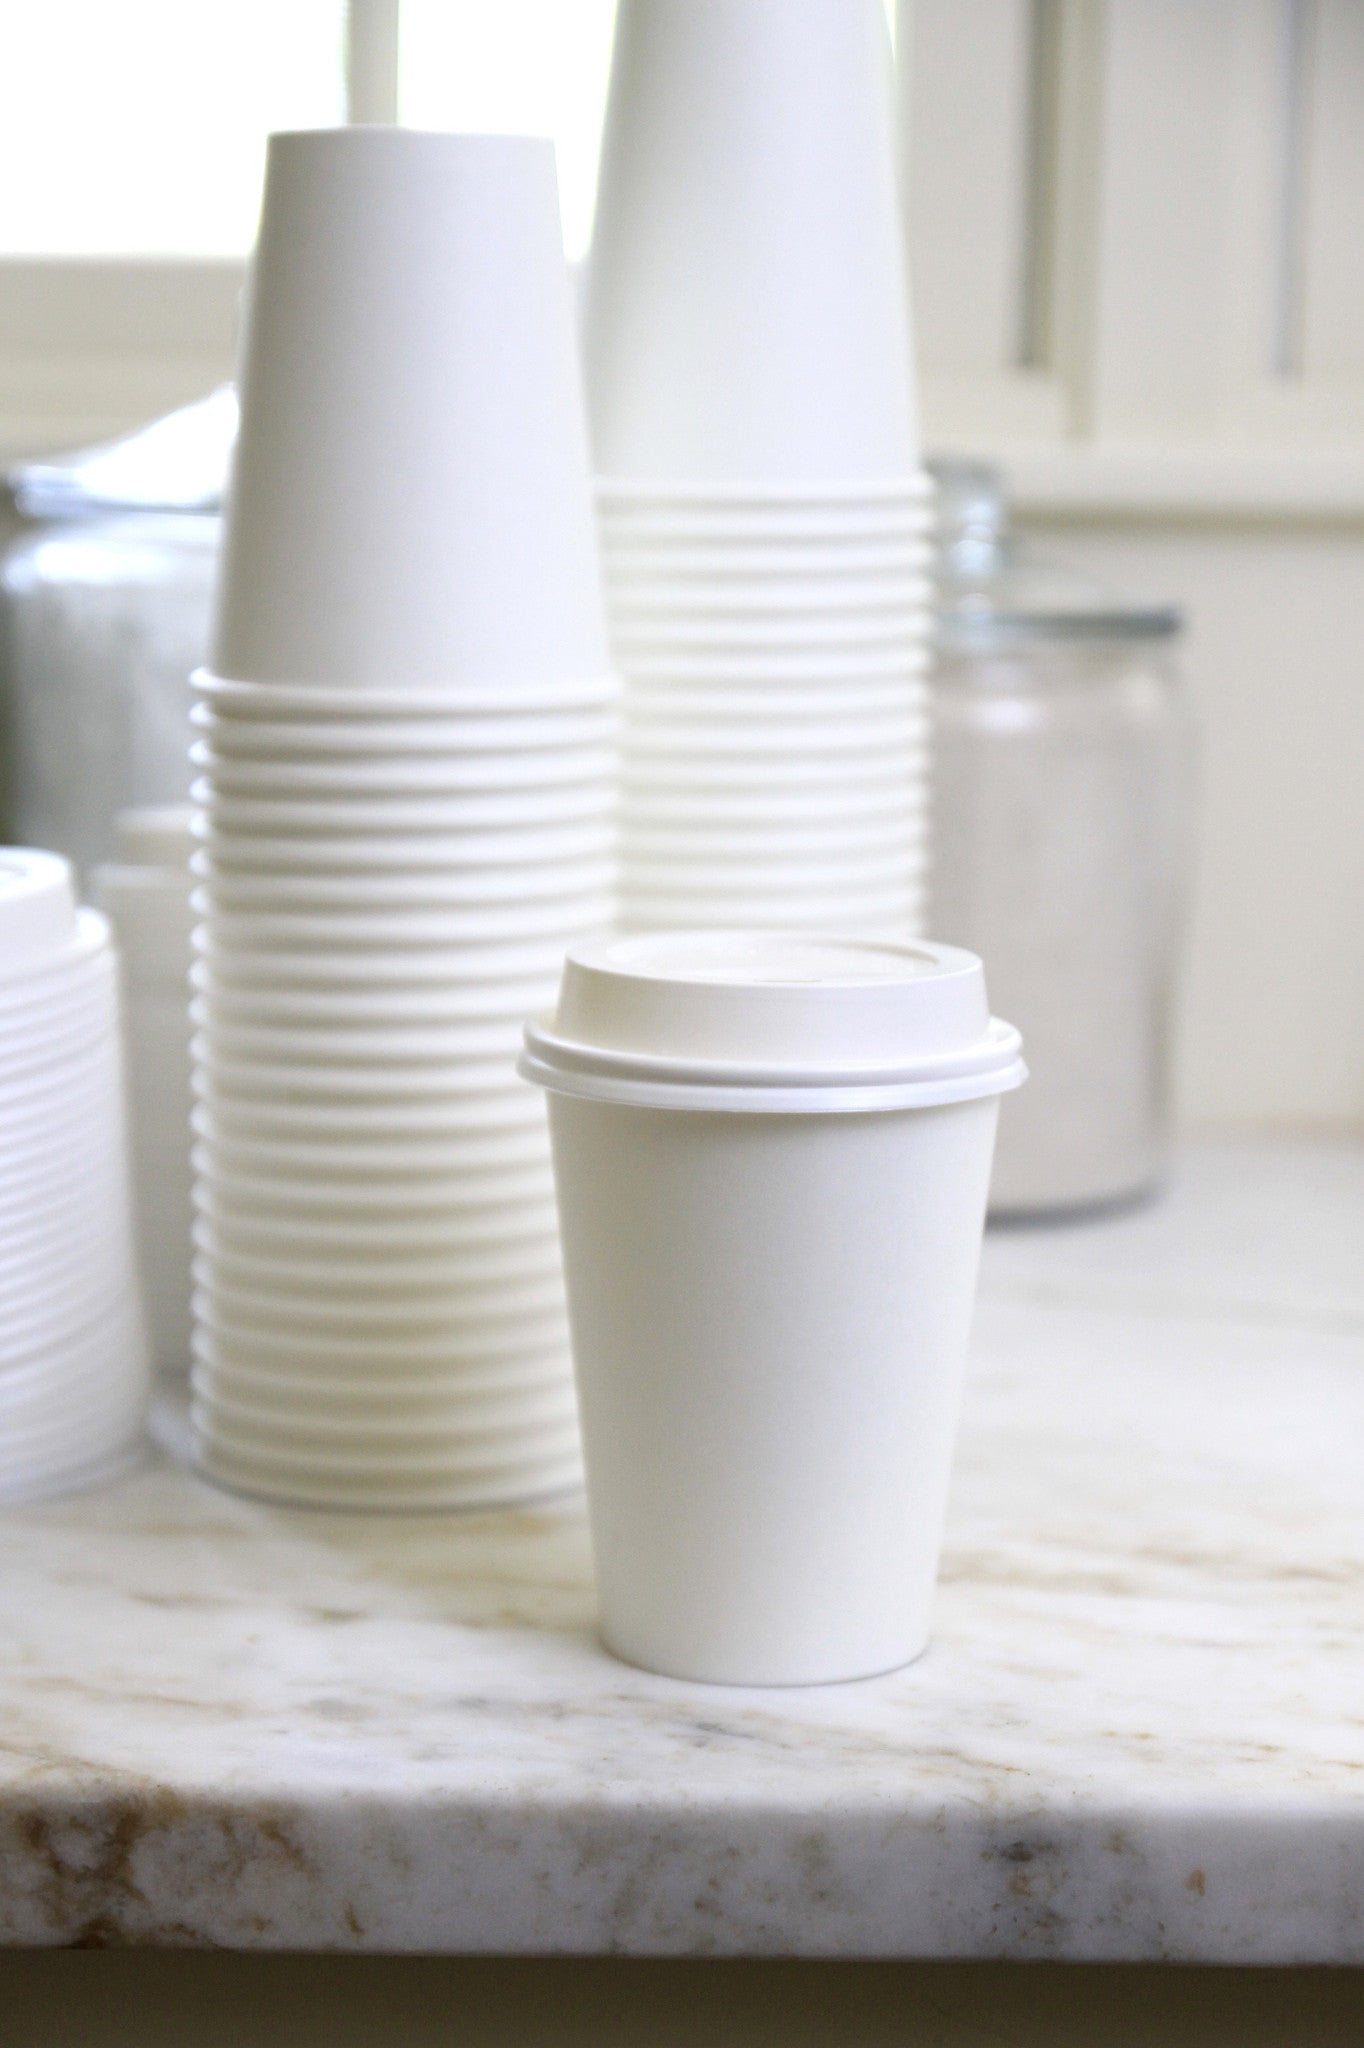 Paper Coffee Cups & Lids - 2 sizes available